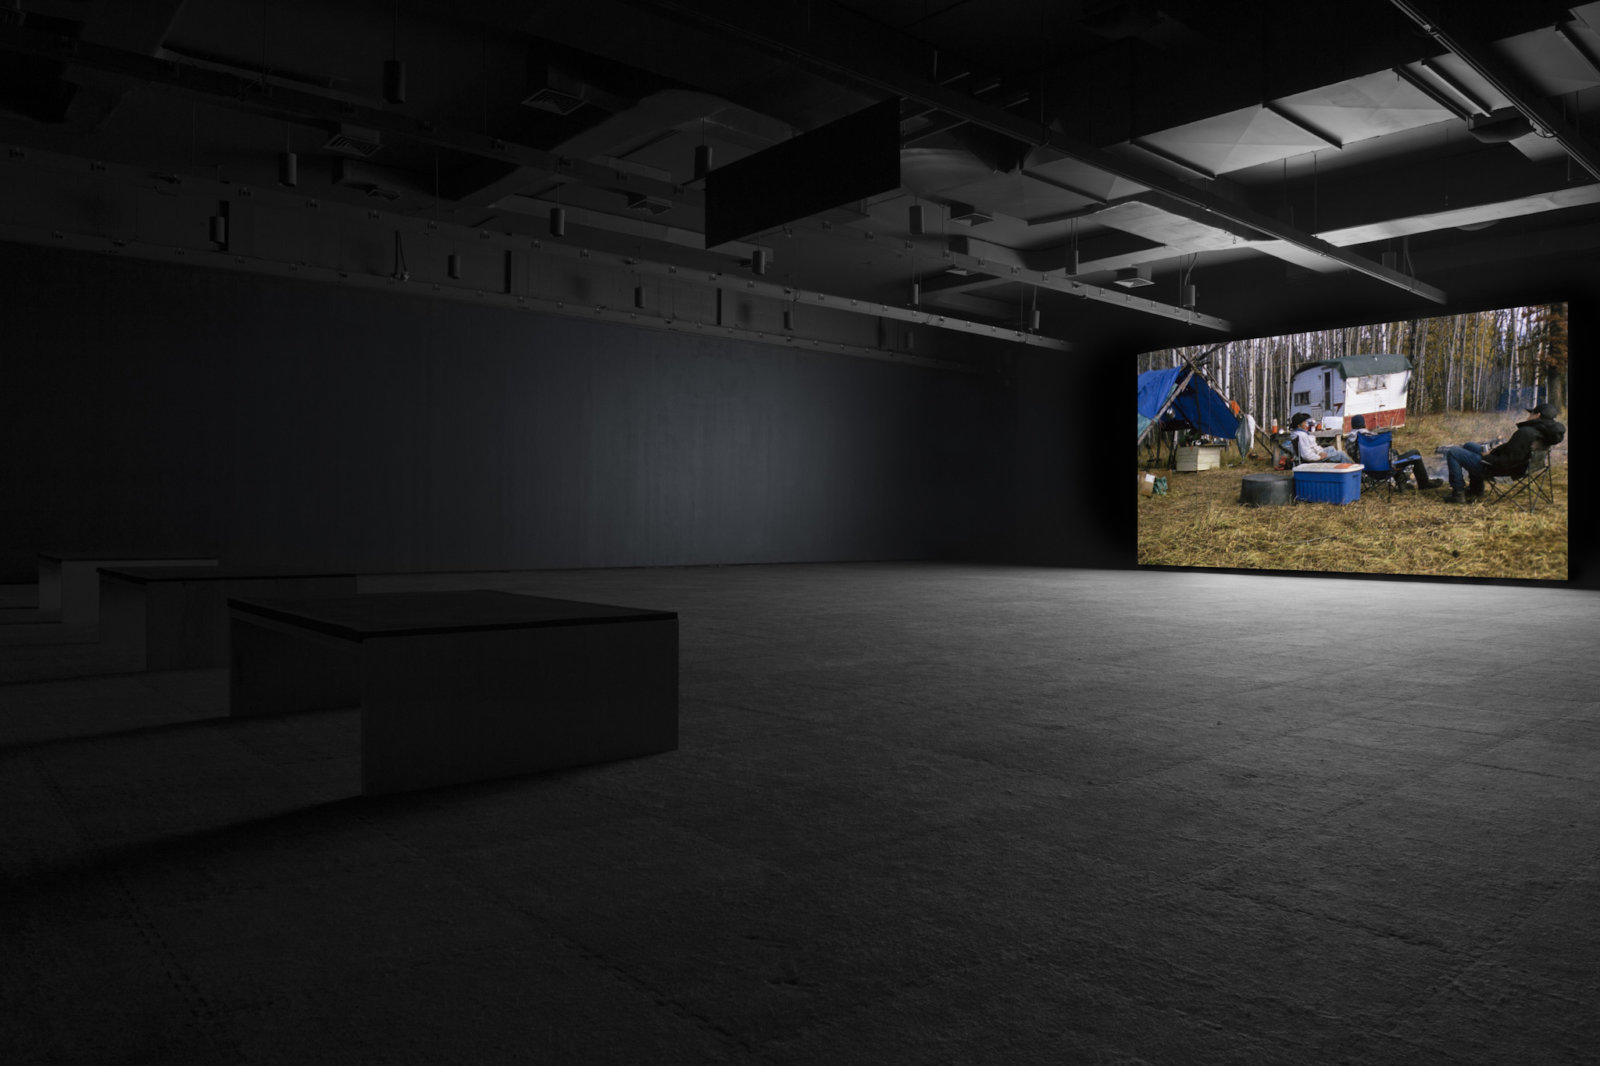 Brian Jungen and Duane Linklater, Modest Livelihood, 2012, super 16mm film, transferred to blu-ray, 50 minutes, silent. Installation view, Walter Phillips Gallery, Banff, 2012.